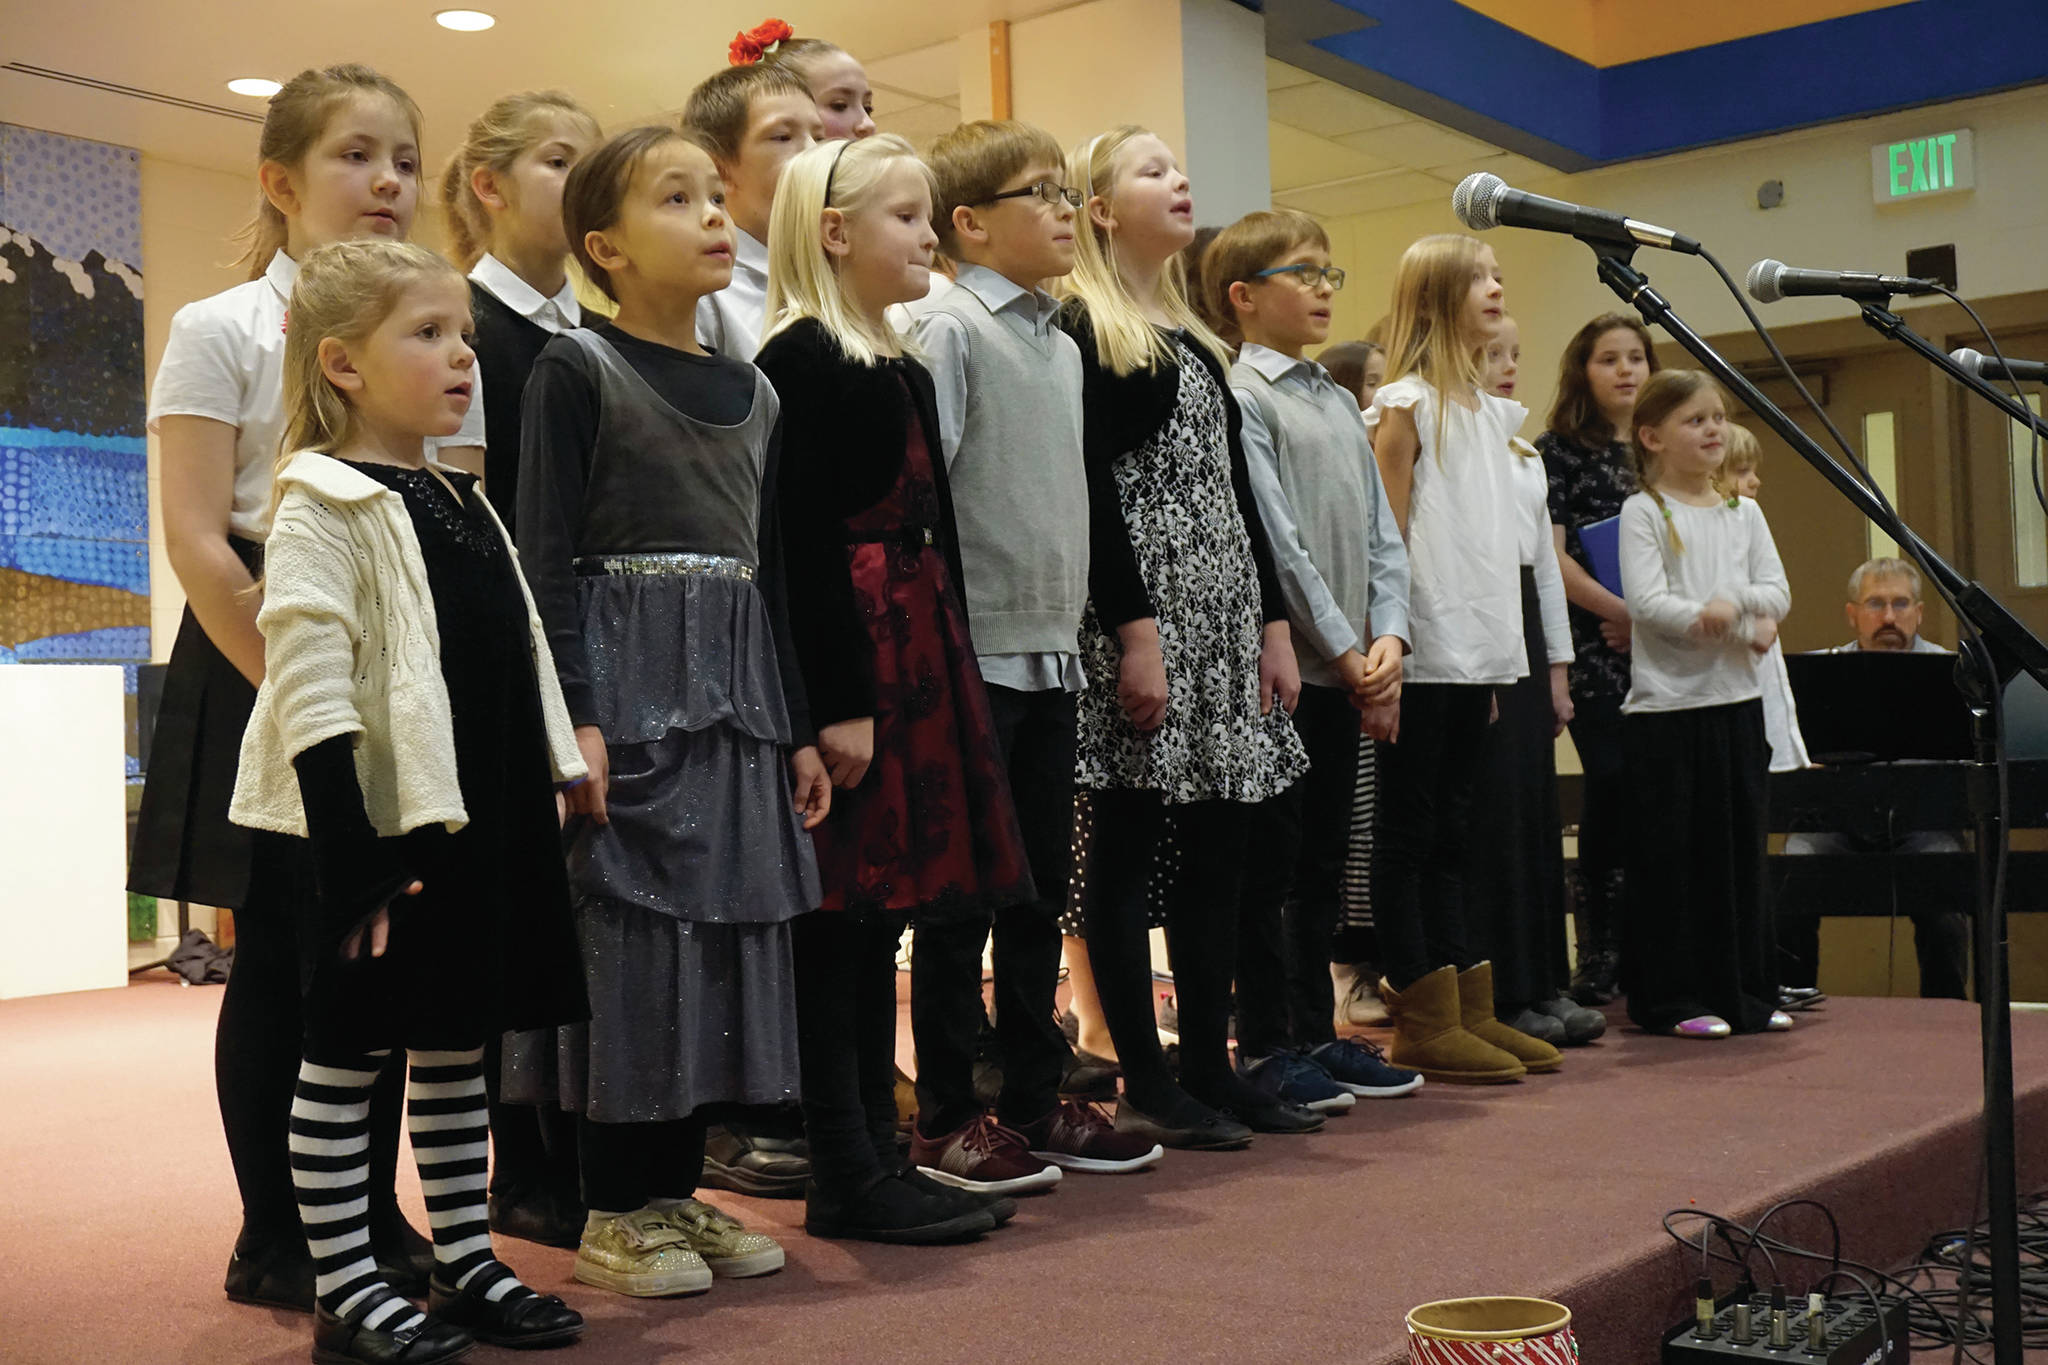 Children with the Harbor School of Music sing at the Homer Nutcracker Faire on Sunday, Dec. 8, 2019, at Homer High School in Homer, Alaska. (Photo by Michael Armstrong/Homer News)